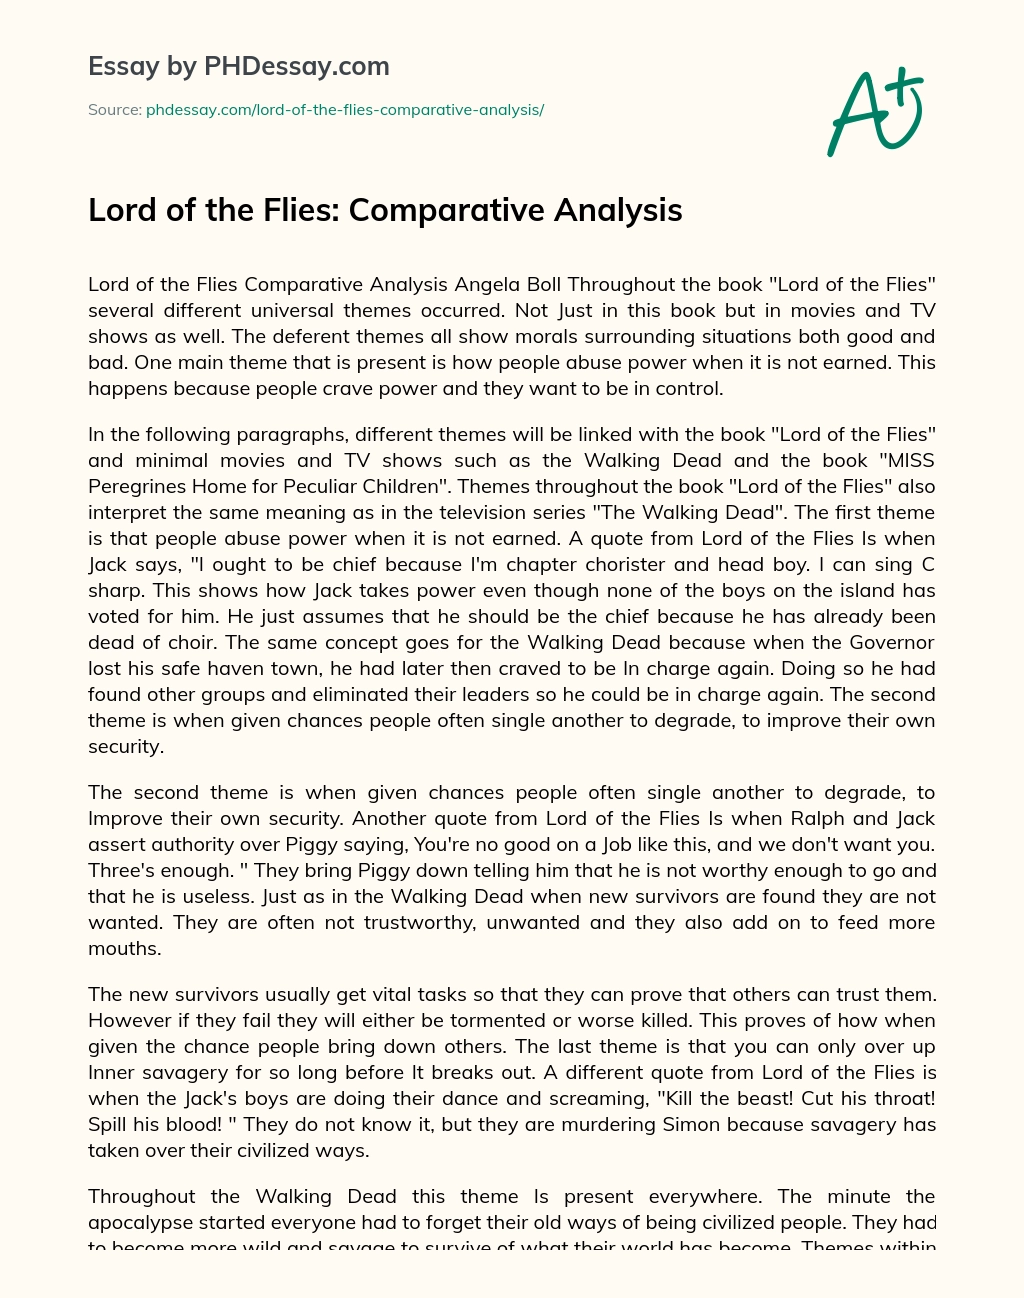 Lord of the Flies: Comparative Analysis essay